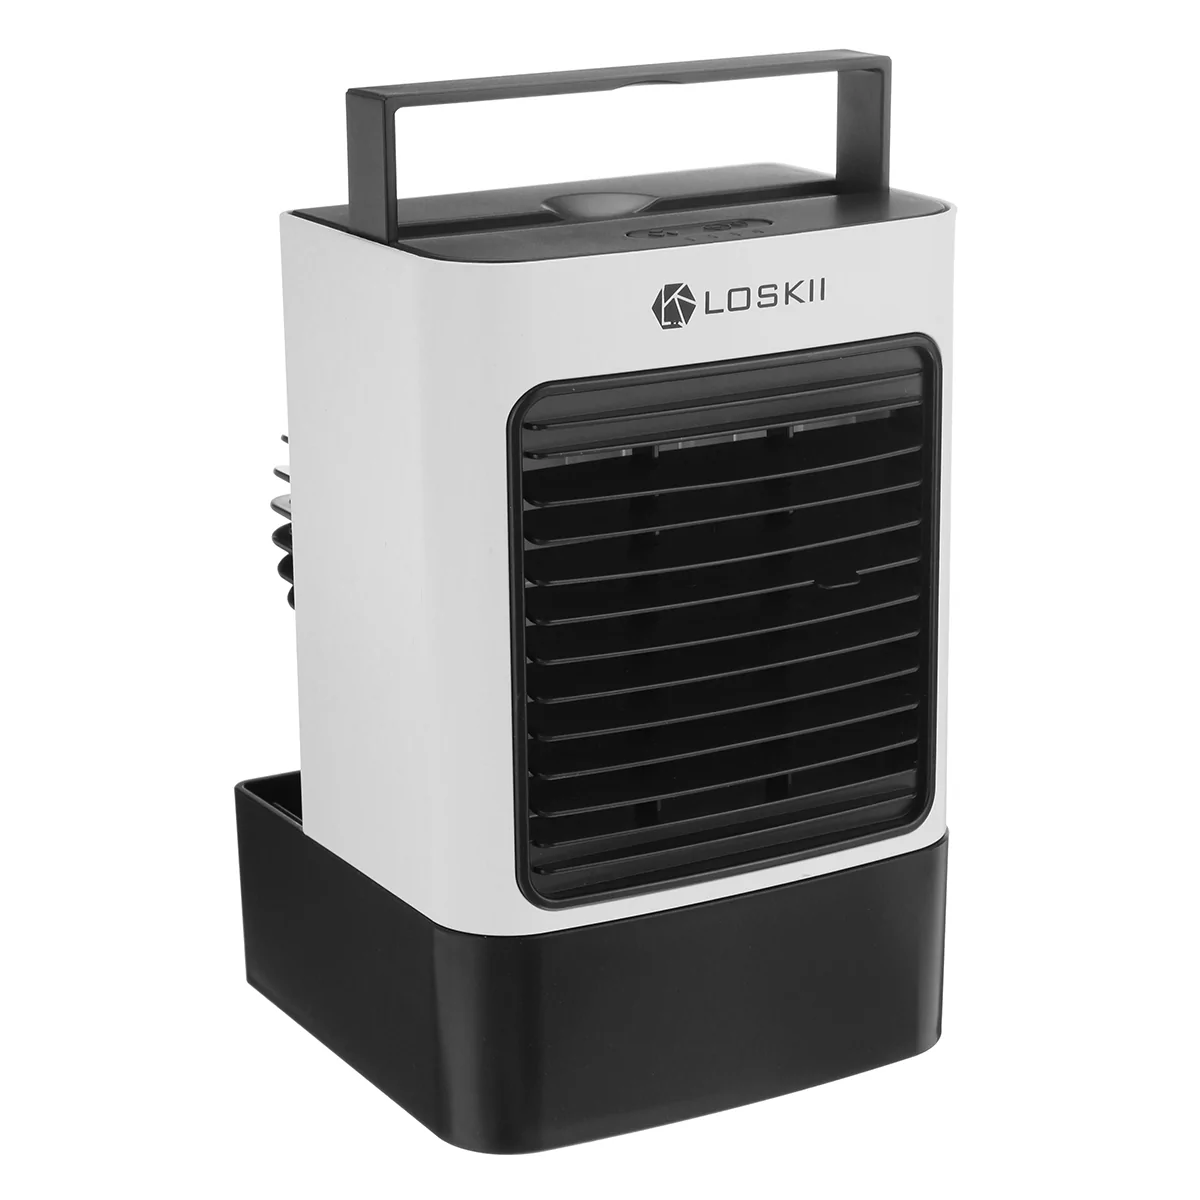 Microhoo-MH02A-Portable-USB-Air-Conditioning-25ms-Cooling-Fan-Negative-Ion-Purifier-Air-Cooler-Stepl-1822647-4